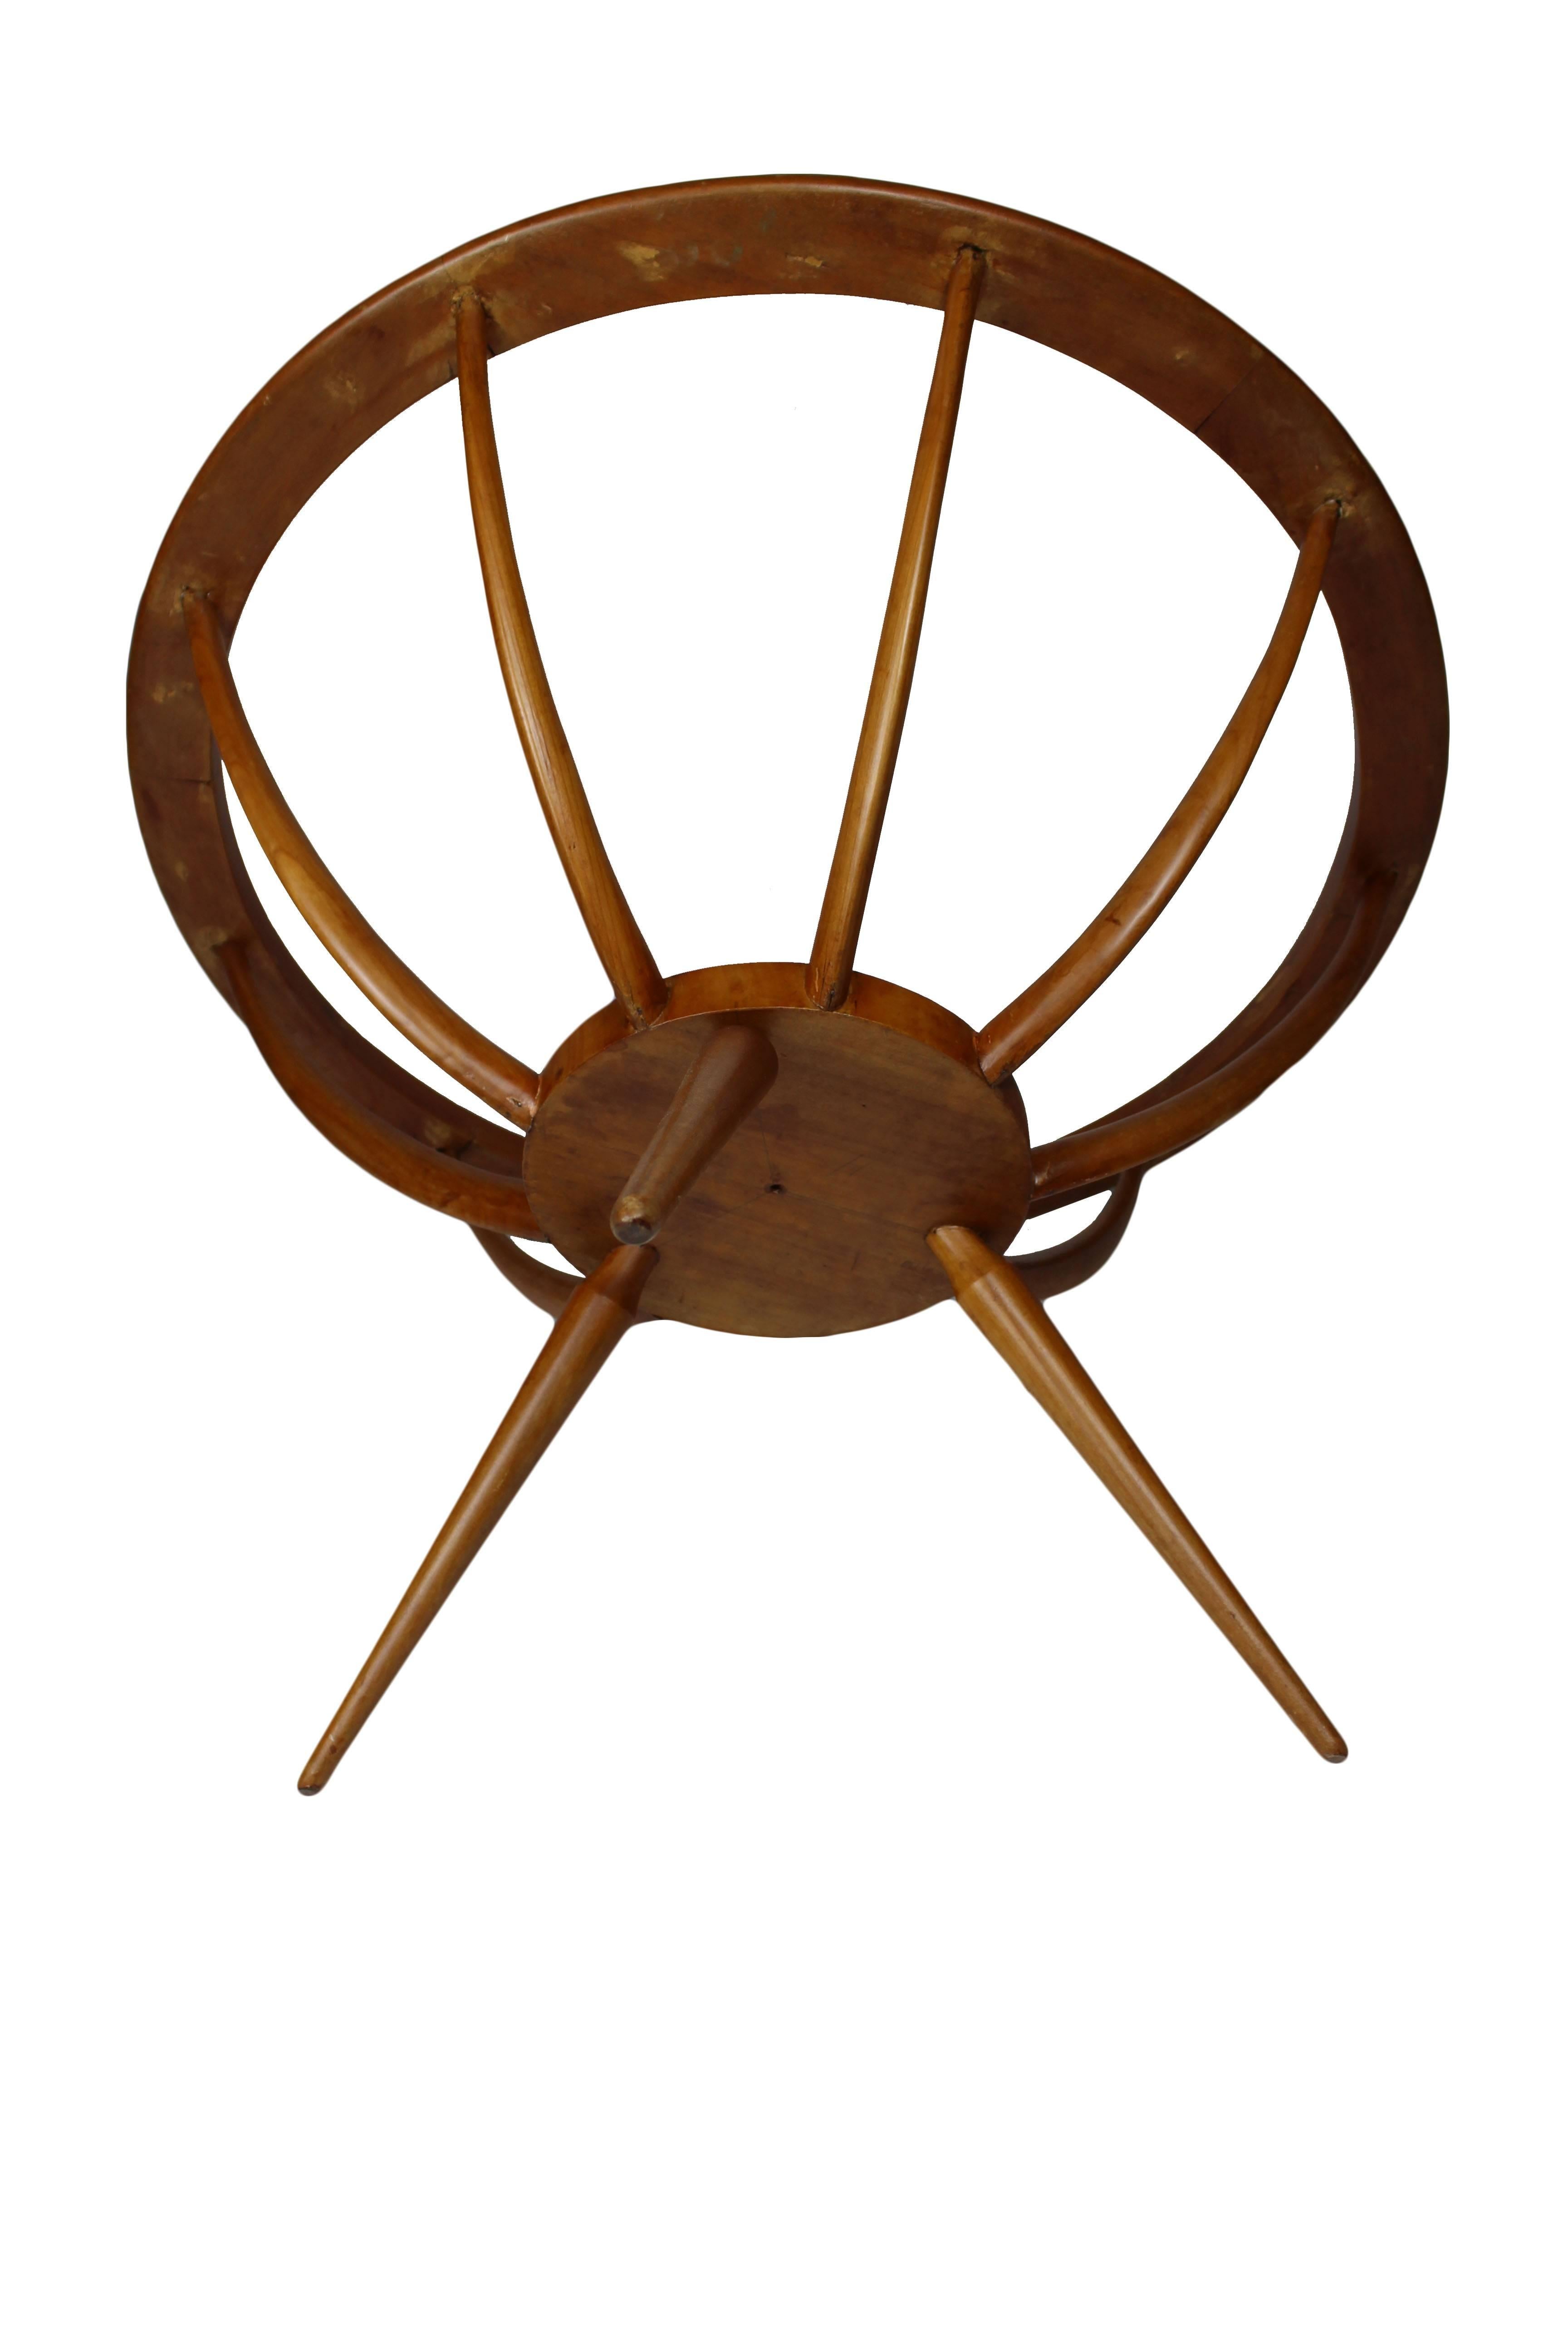 20th Century Olivewood Midcentury Italian Spider-Leg Table with Glass and Brass Base, 1950s